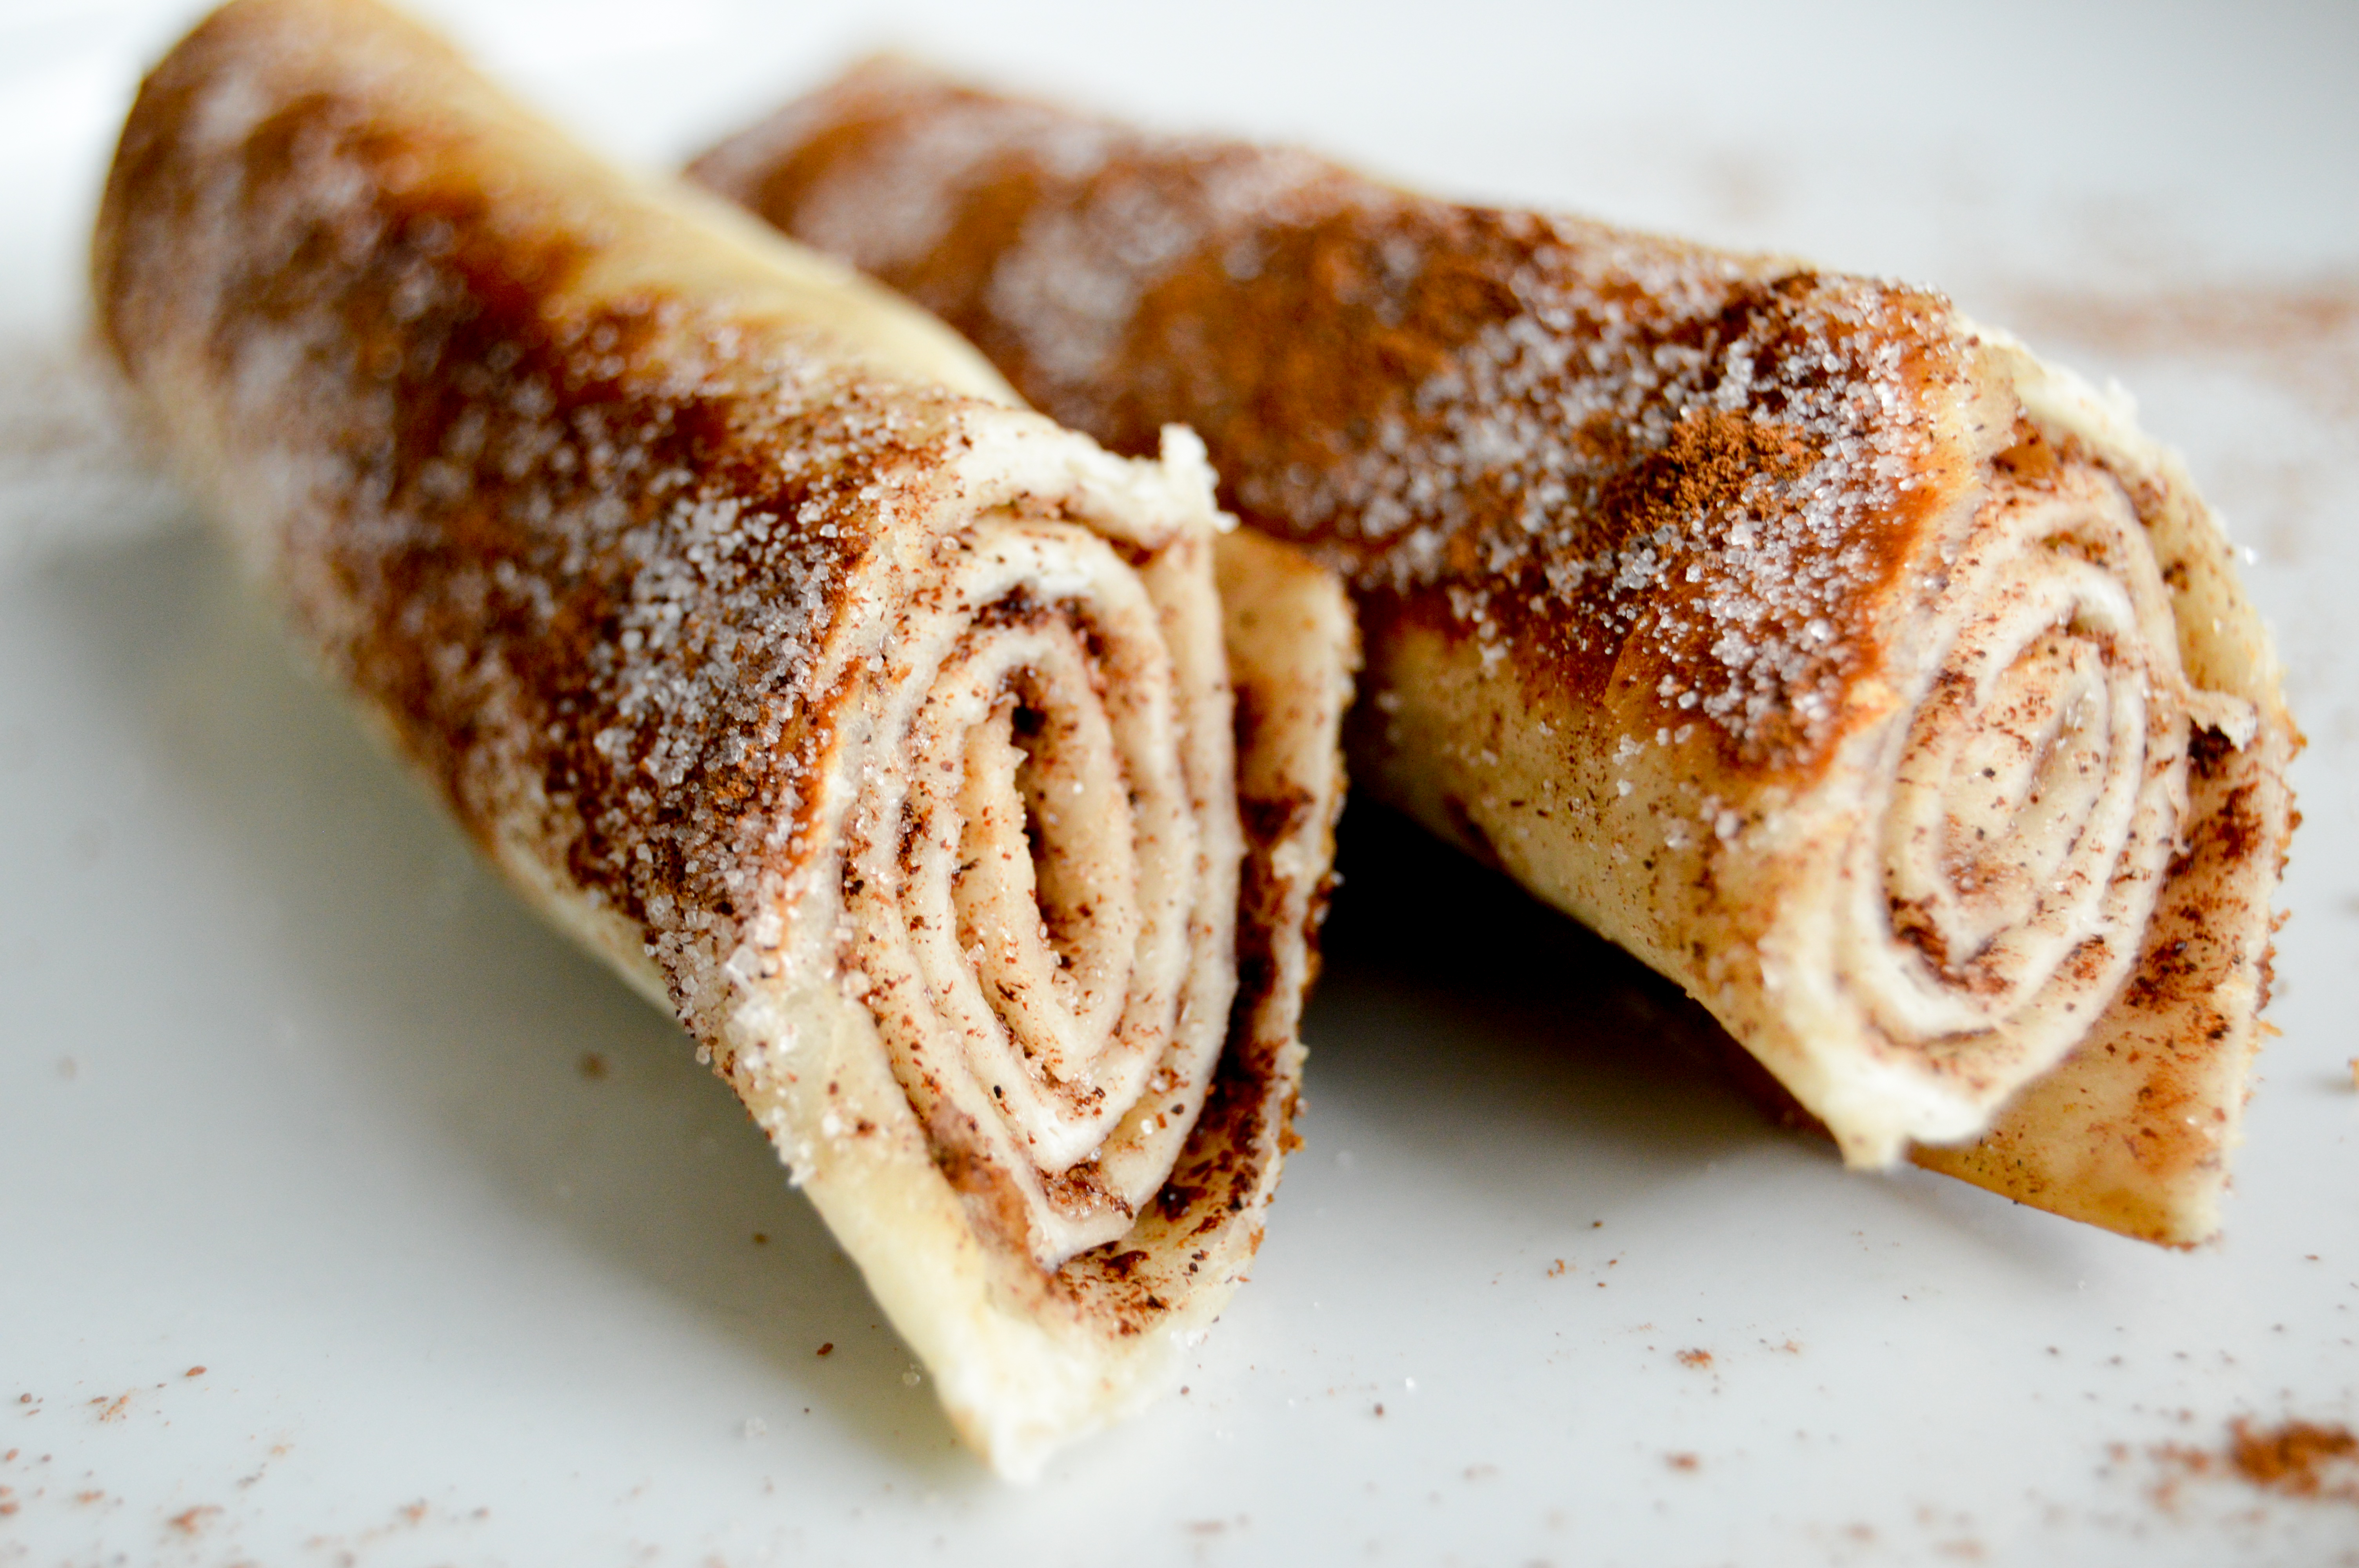 Cinnamon sugar tortilla roll ups recipe inspired by churros. These easy churro pinwheels make a tasty snack, appetizer, or treat for Cinco de Mayo. Simple 4 ingredient recipe that the kids will love! 